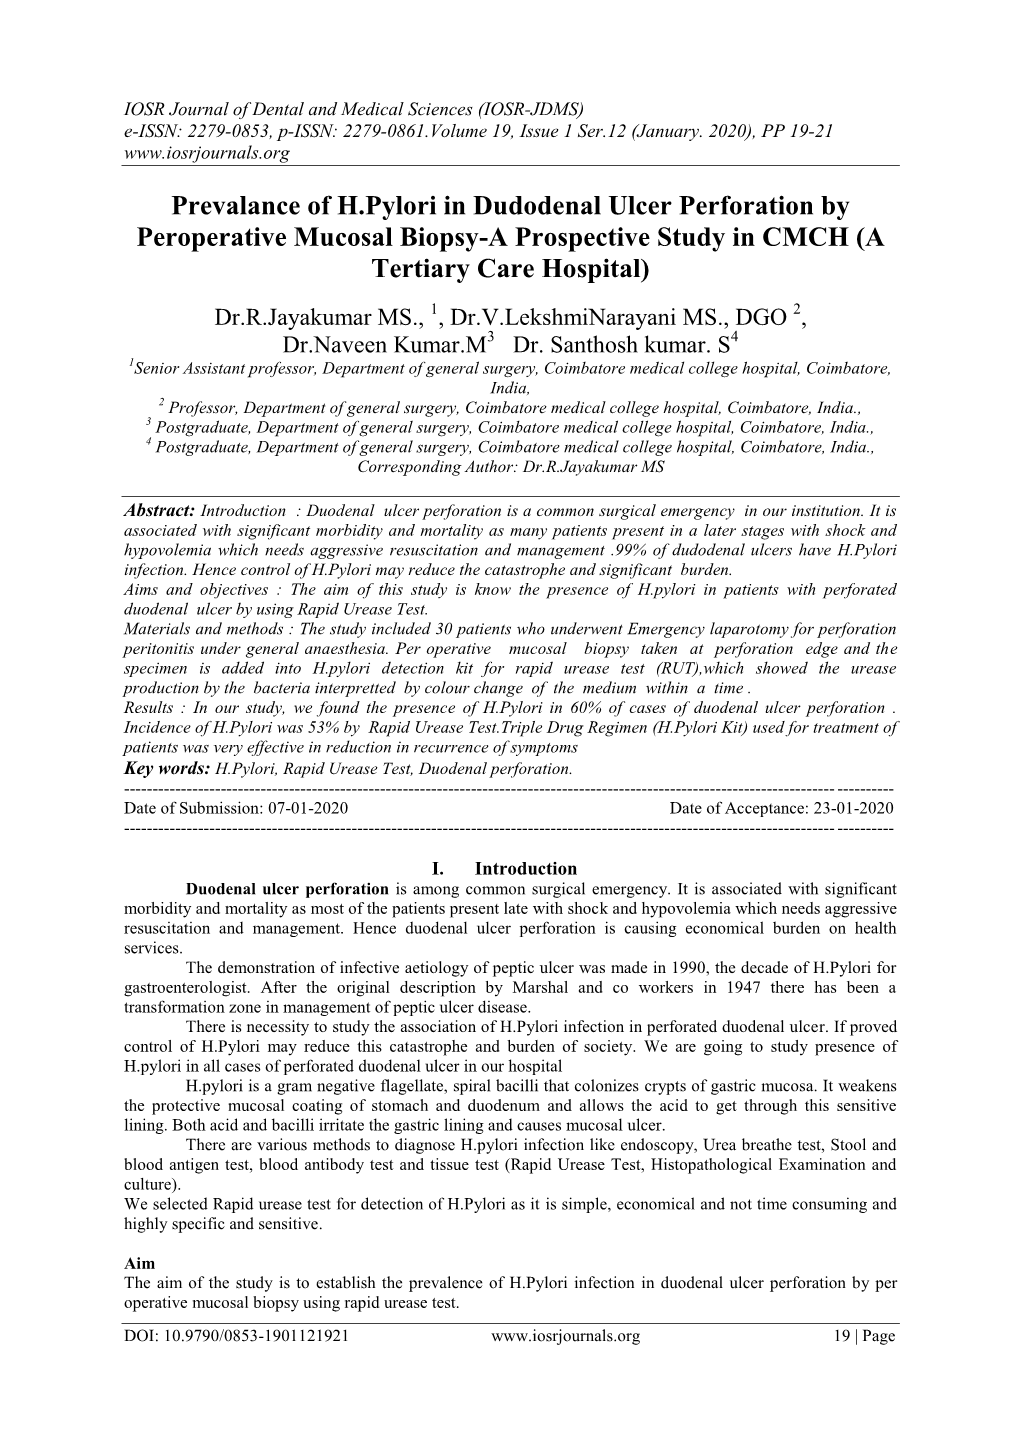 Prevalance of H.Pylori in Dudodenal Ulcer Perforation by Peroperative Mucosal Biopsy-A Prospective Study in CMCH (A Tertiary Care Hospital)